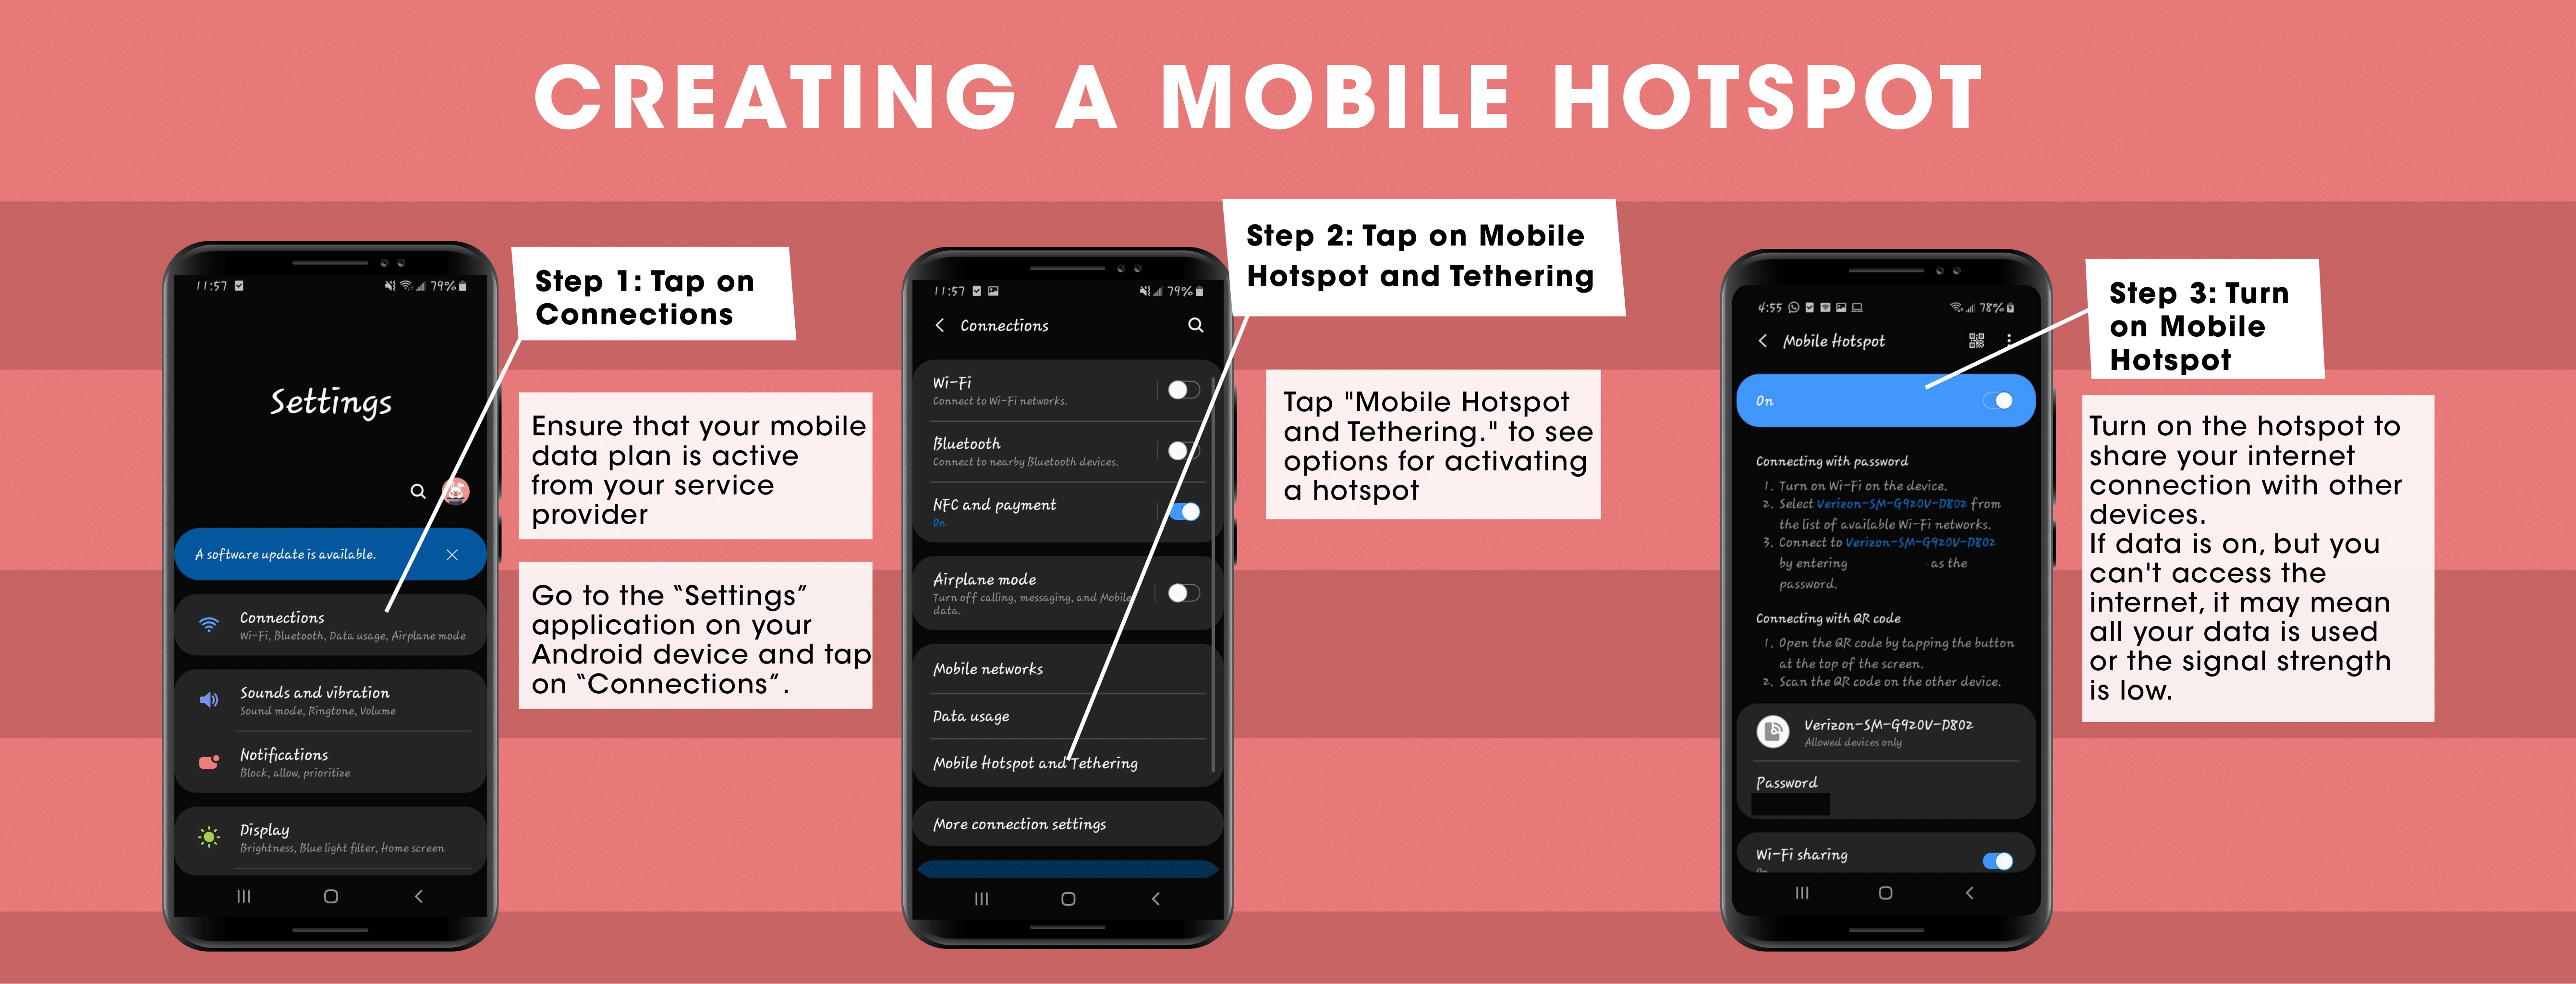 Graphic showing the steps needed to connect to the internet using a mobile hotspot